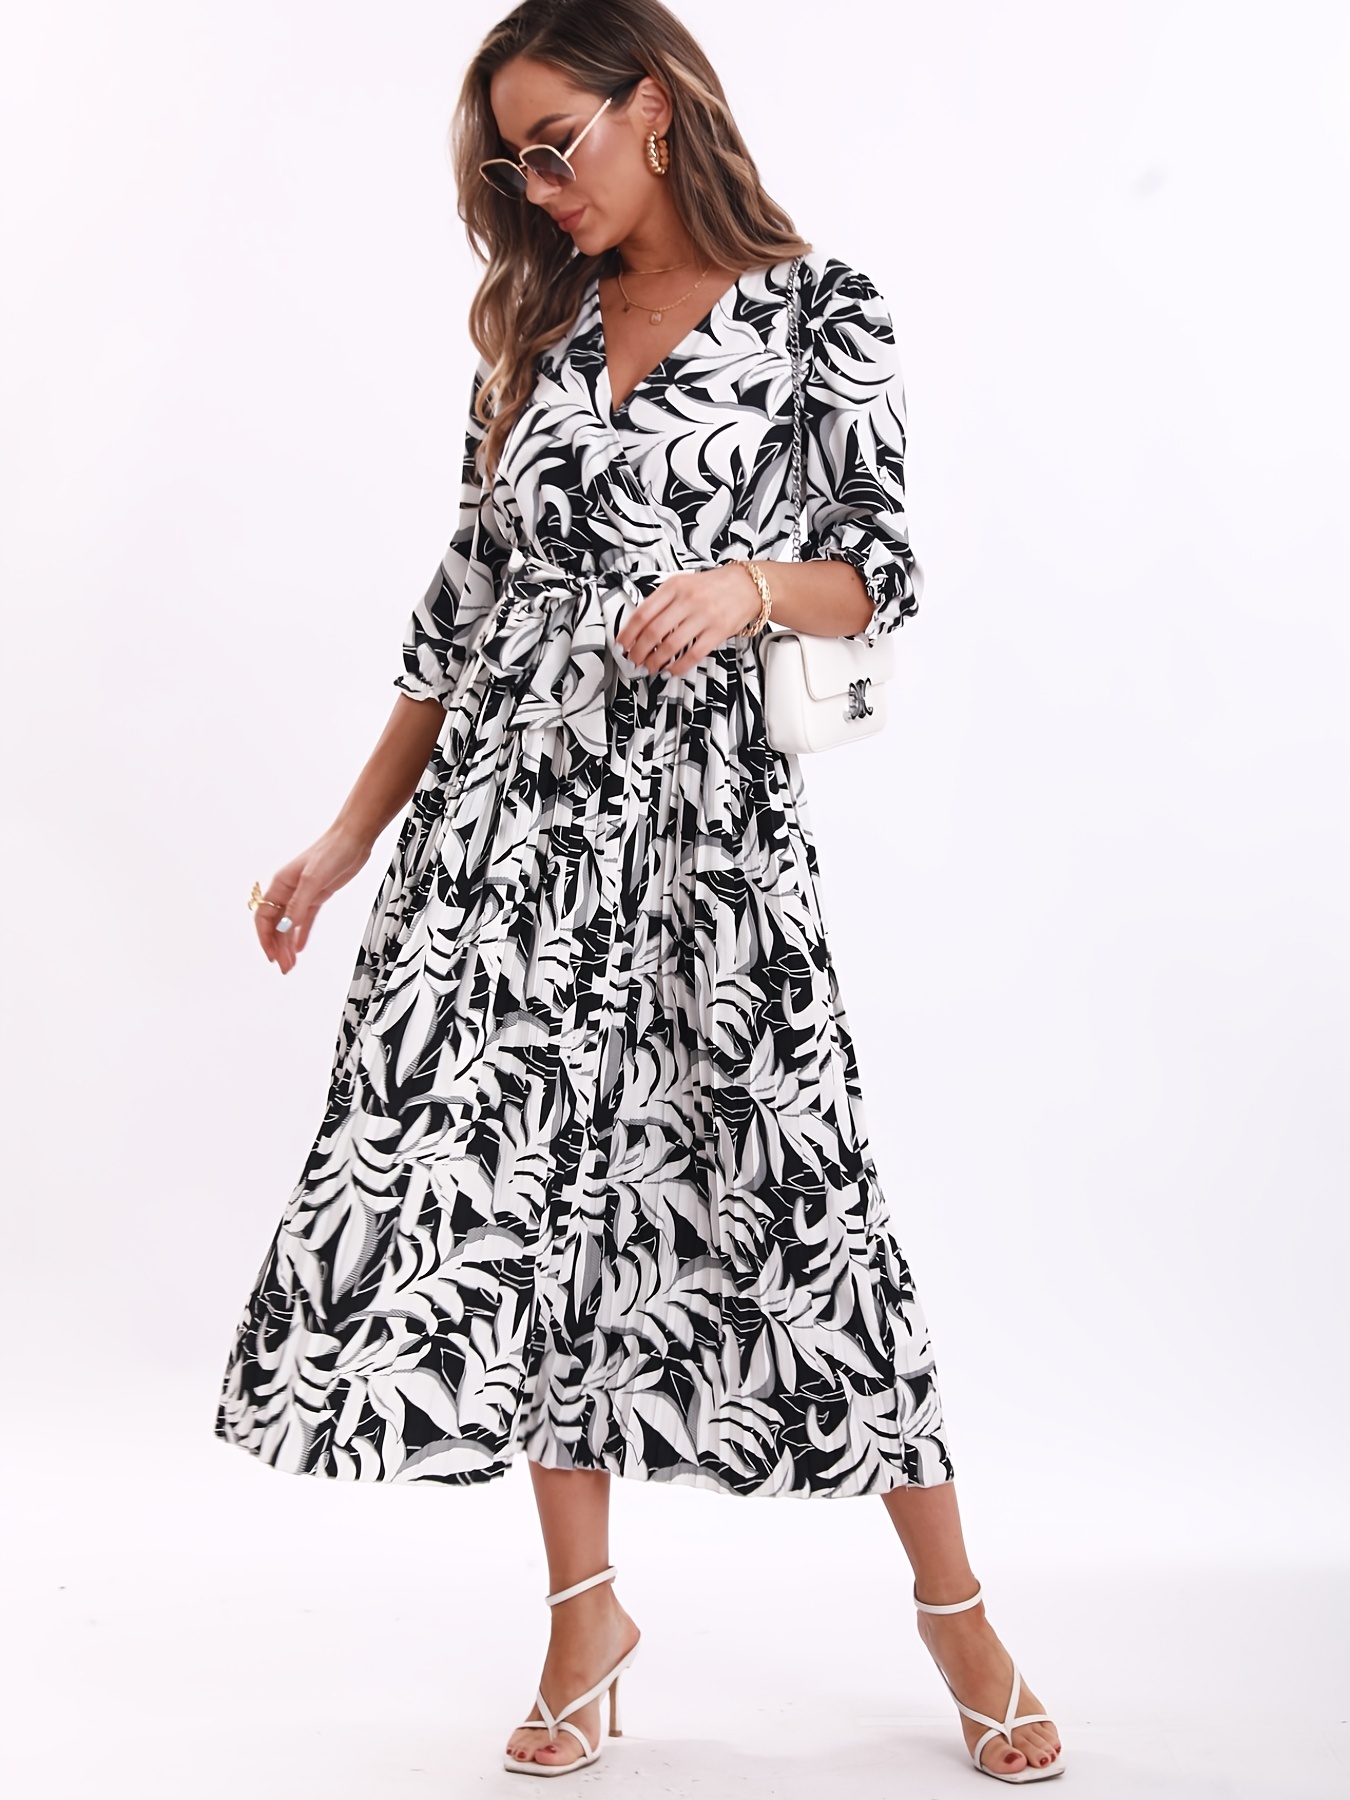 elegant floral print dress v neck 3 4 sleeve dress casual every day dress womens clothing